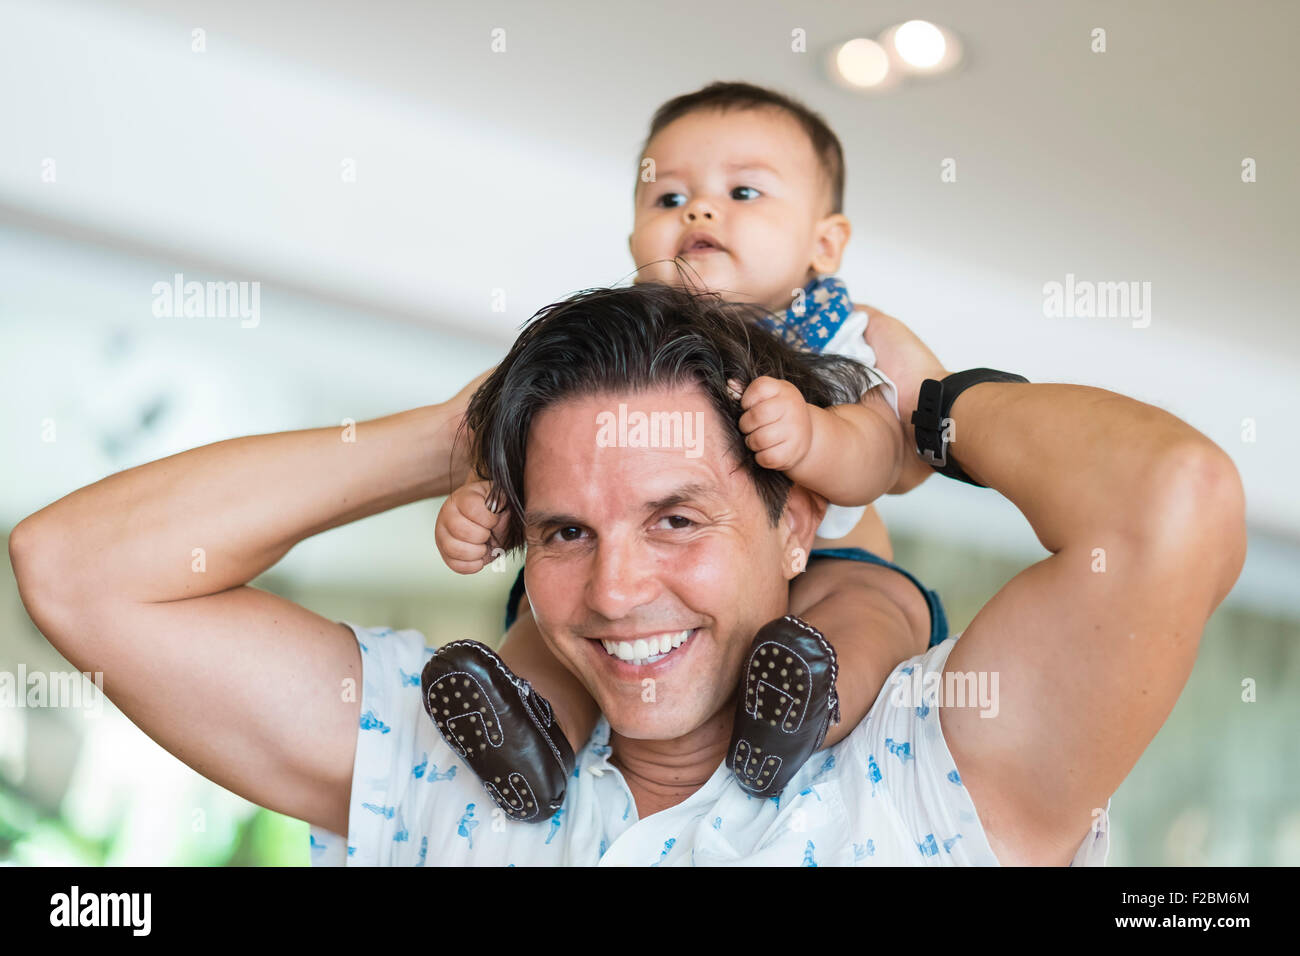 Multi ethnic family - Father carrying baby son on shoulders Stock Photo